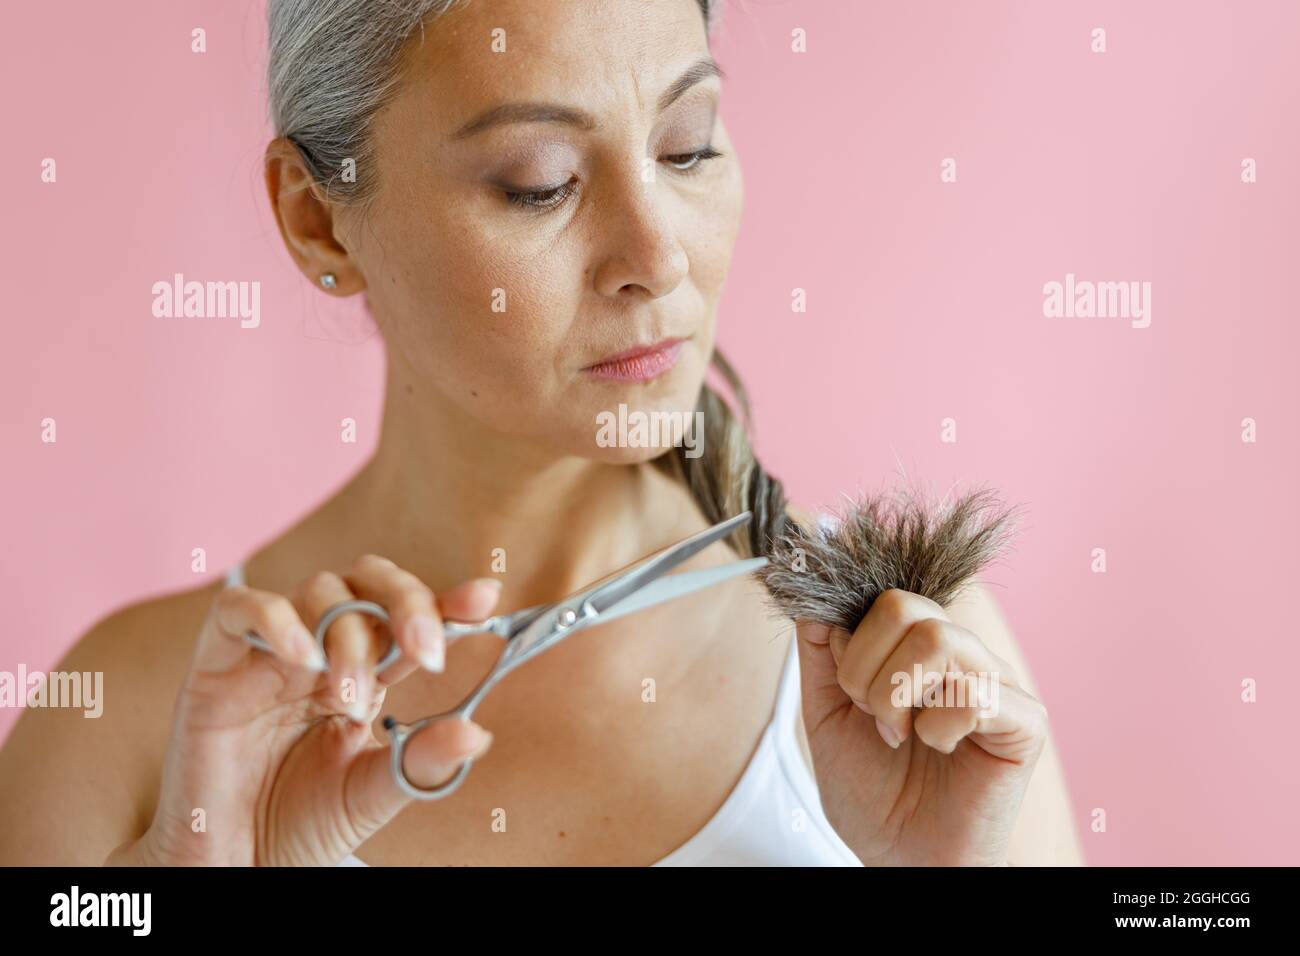 Doubting Asian woman cuts frayed ends of long grey hair on pink background in studio Stock Photo